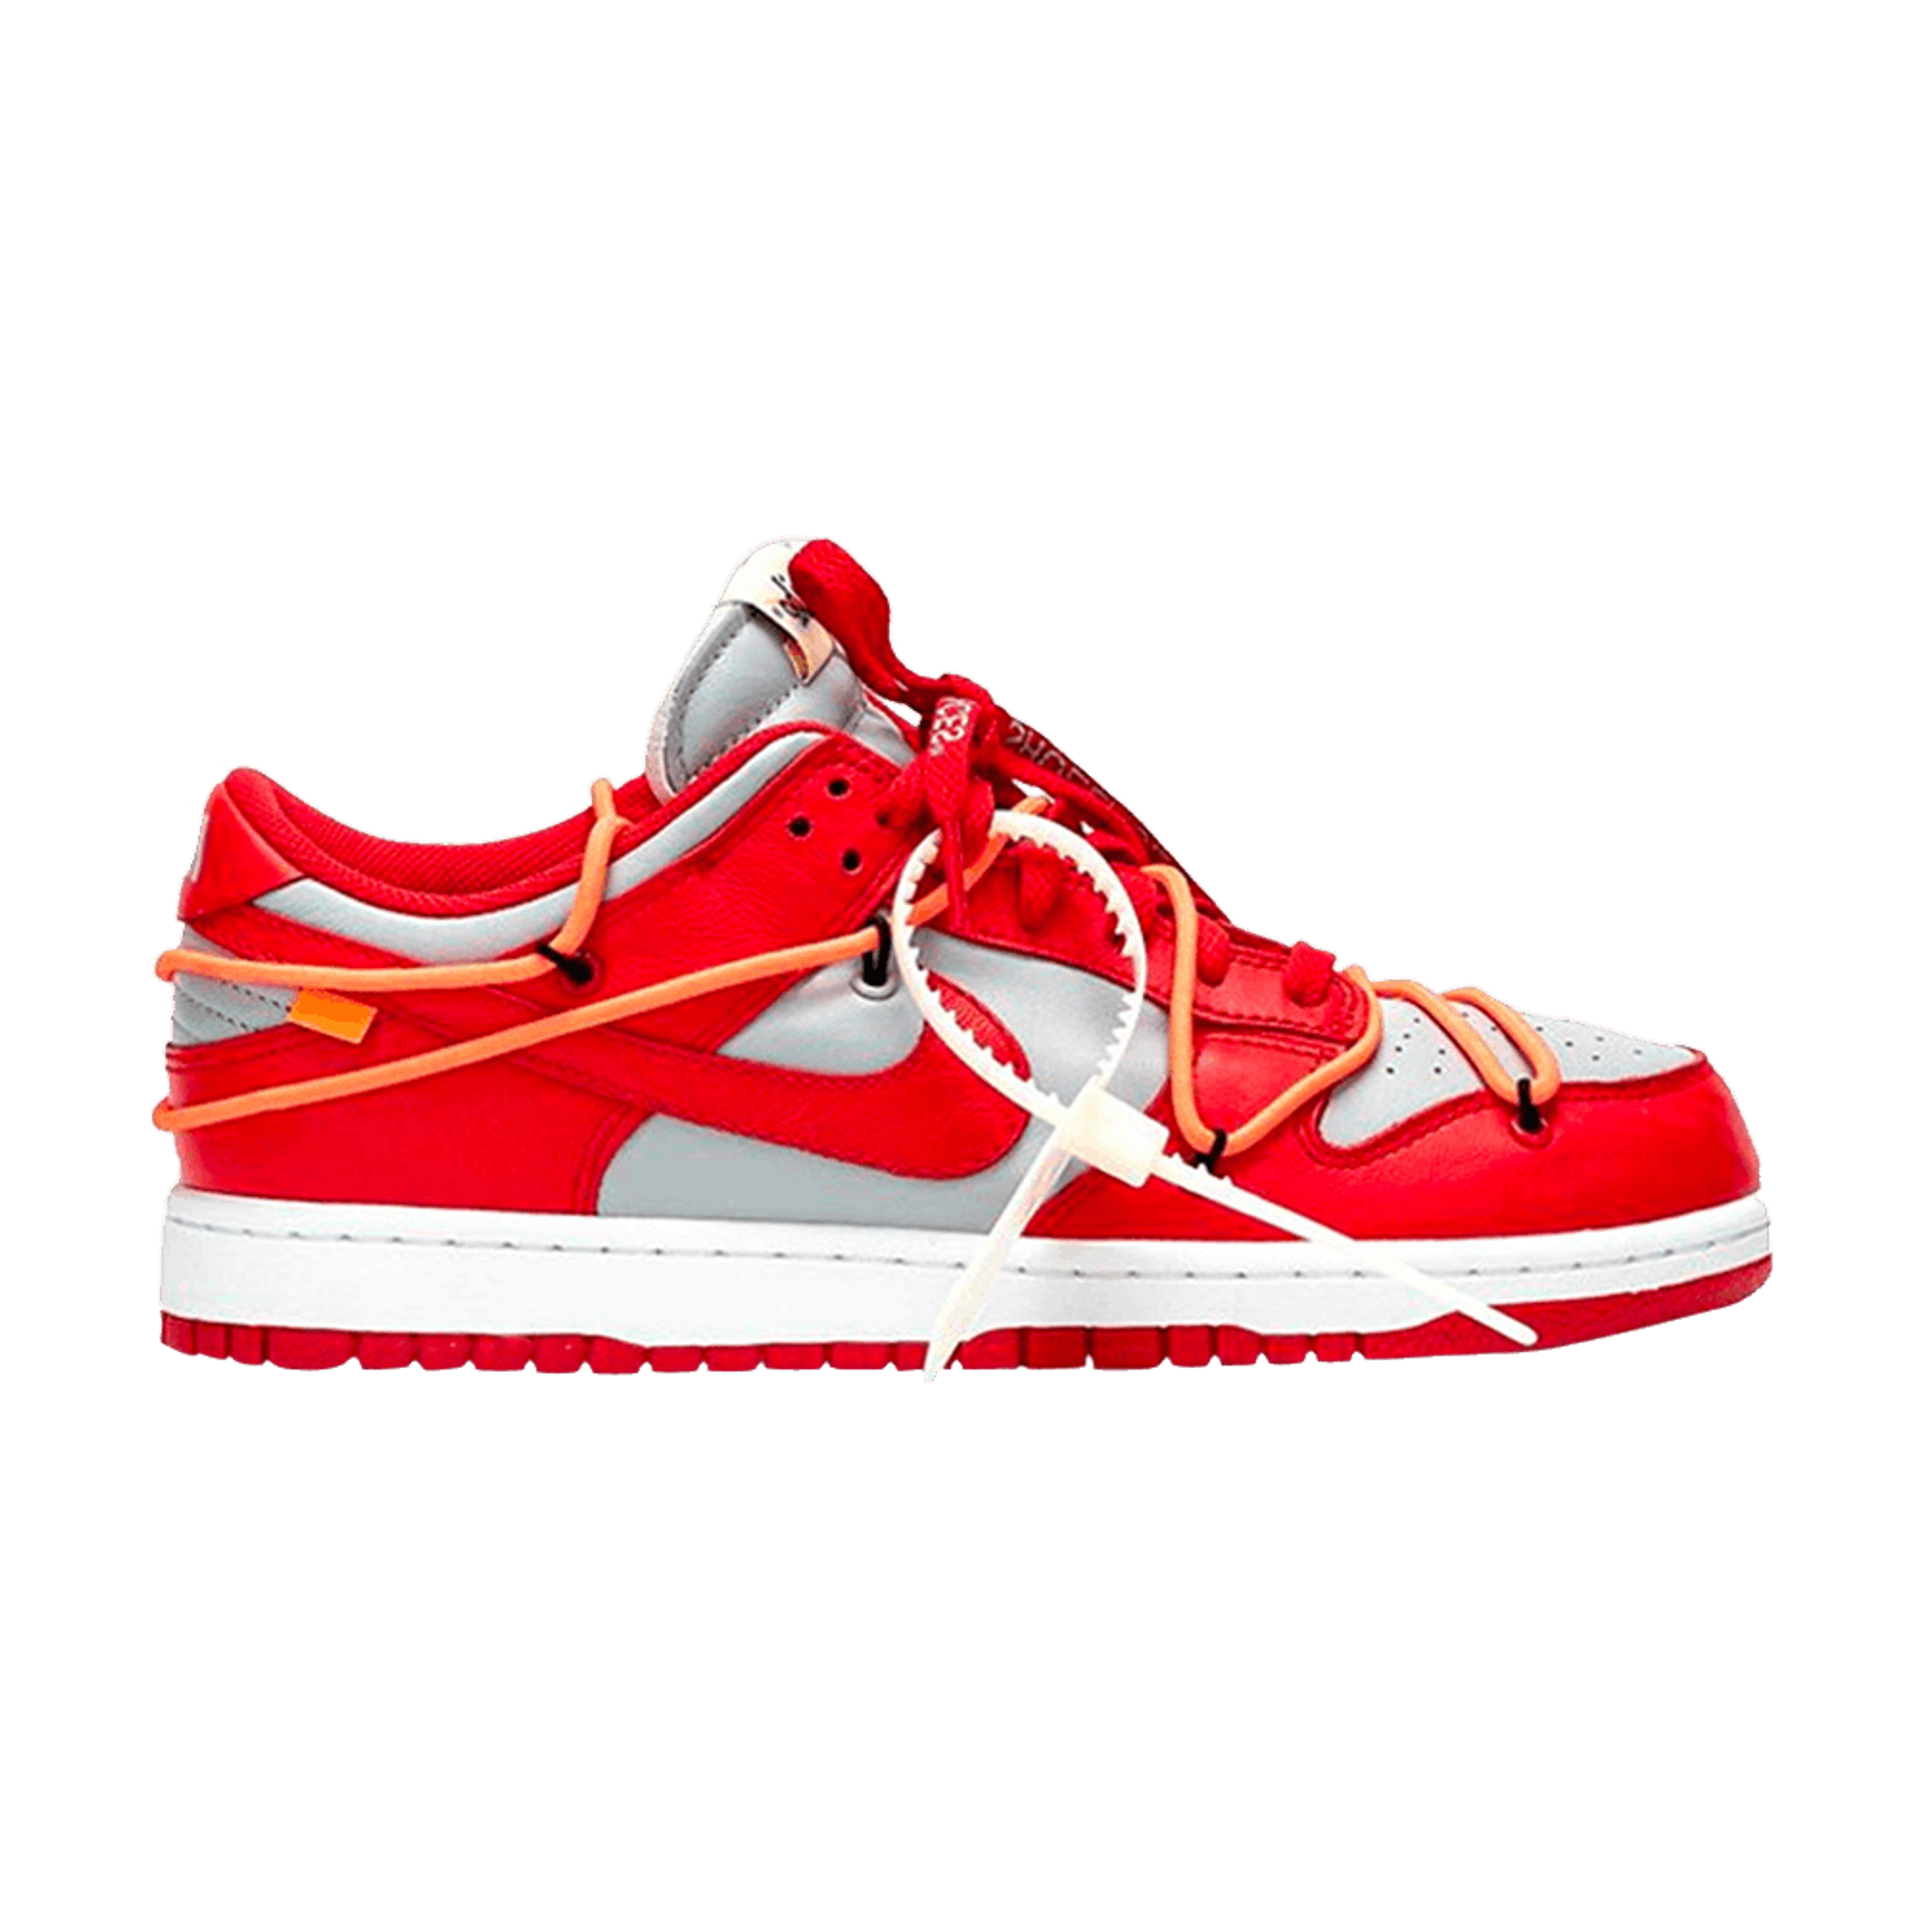 OFF-WHITE x Dunk Low 'University Red'